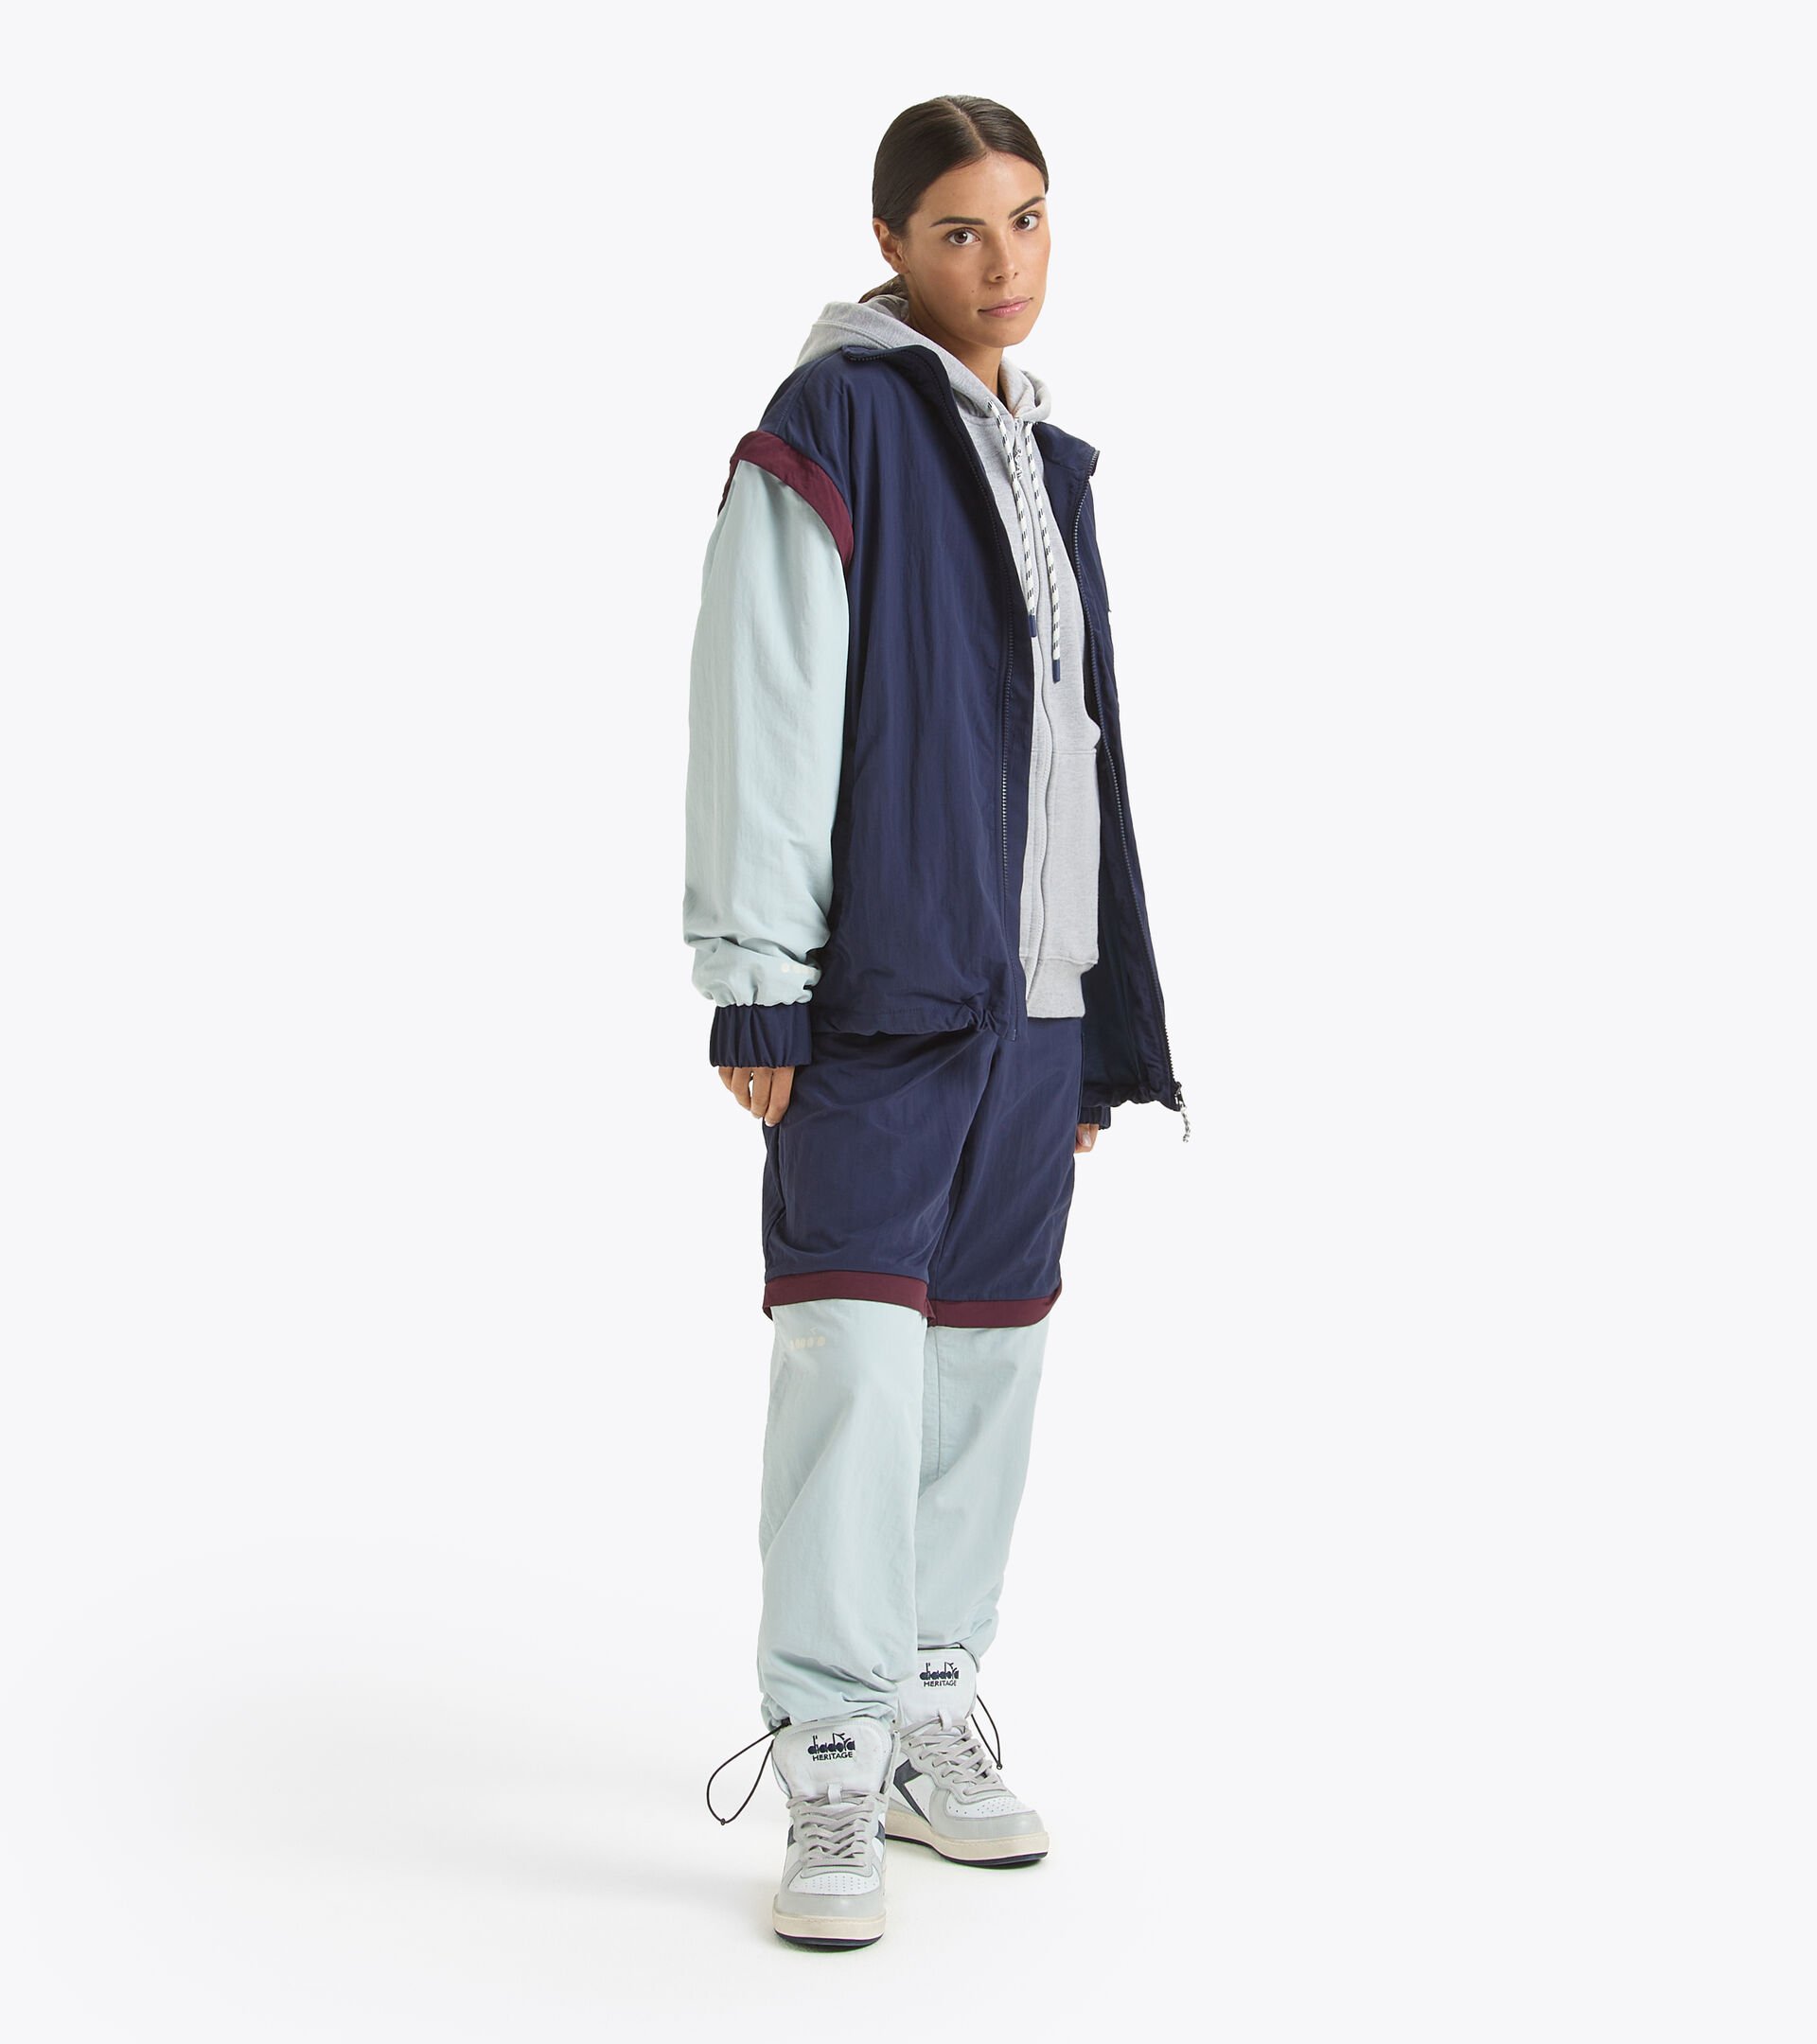 Modulare Hose - Made in Italy - Gender Neutral TRACK PANT LEGACY OCEANA/HOCHHAUS/WINDSOR WEIN - Diadora